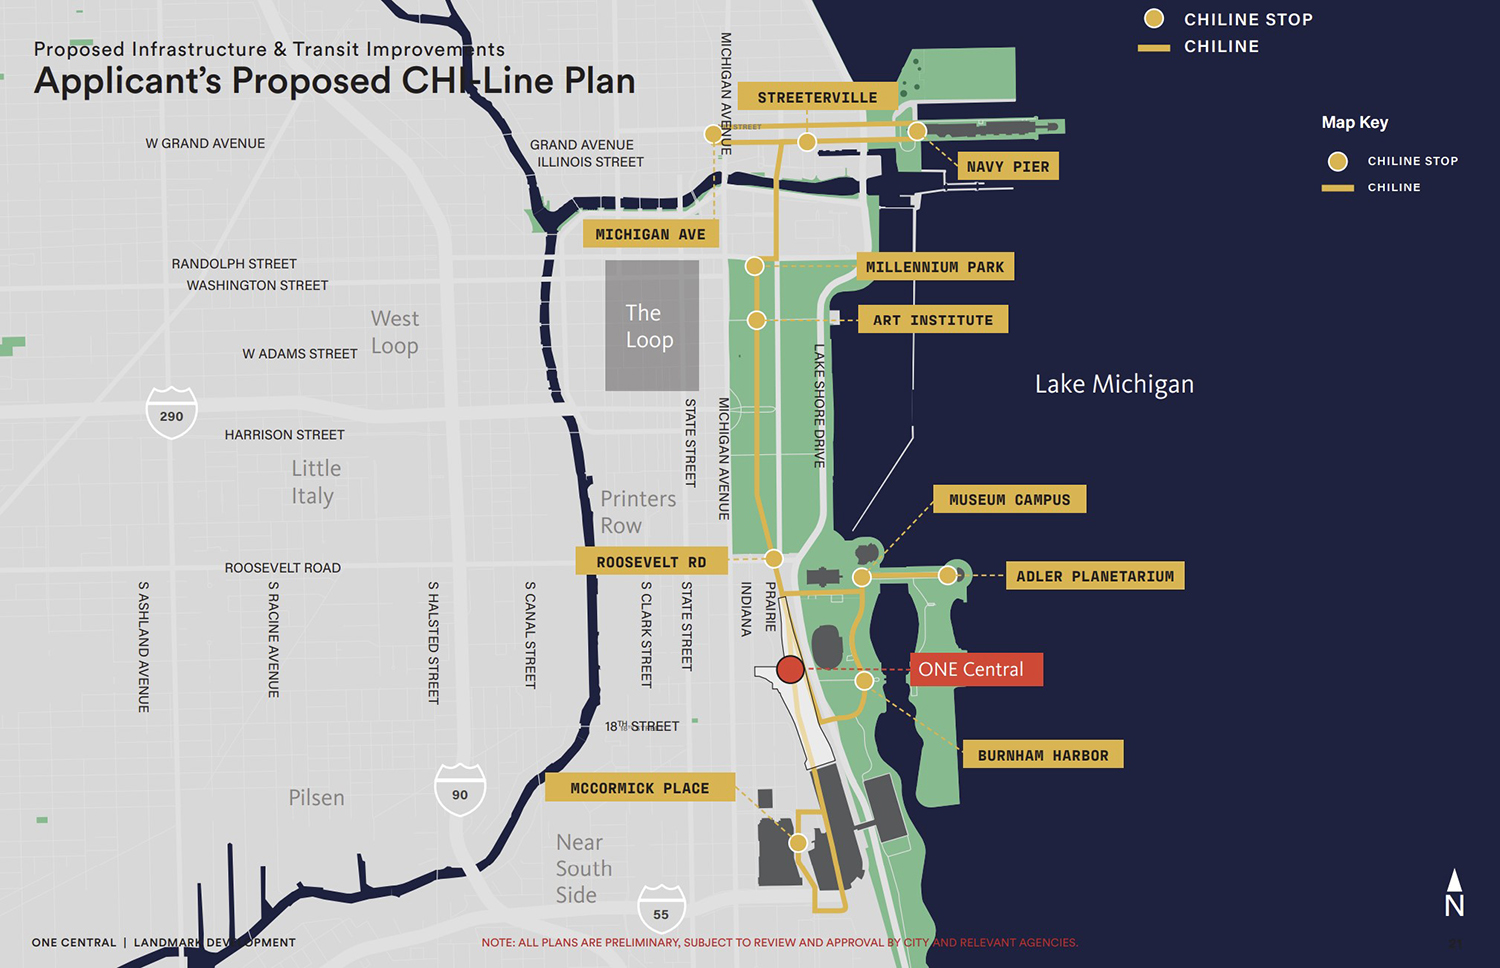 Proposed CHI-Line Route. Diagram by Landmark Development